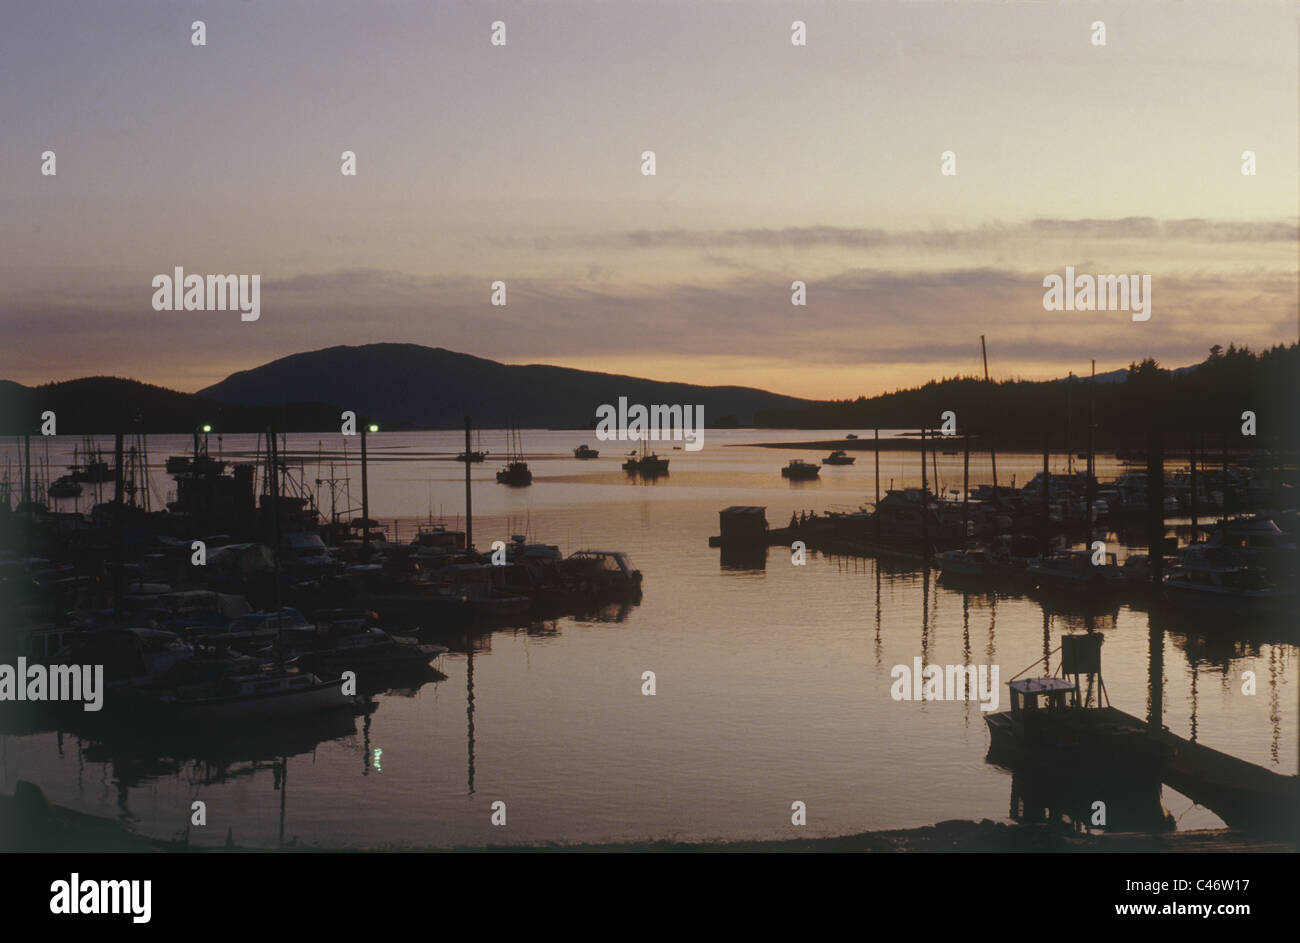 Photograph of a small harbor in Alska at sunset Stock Photo